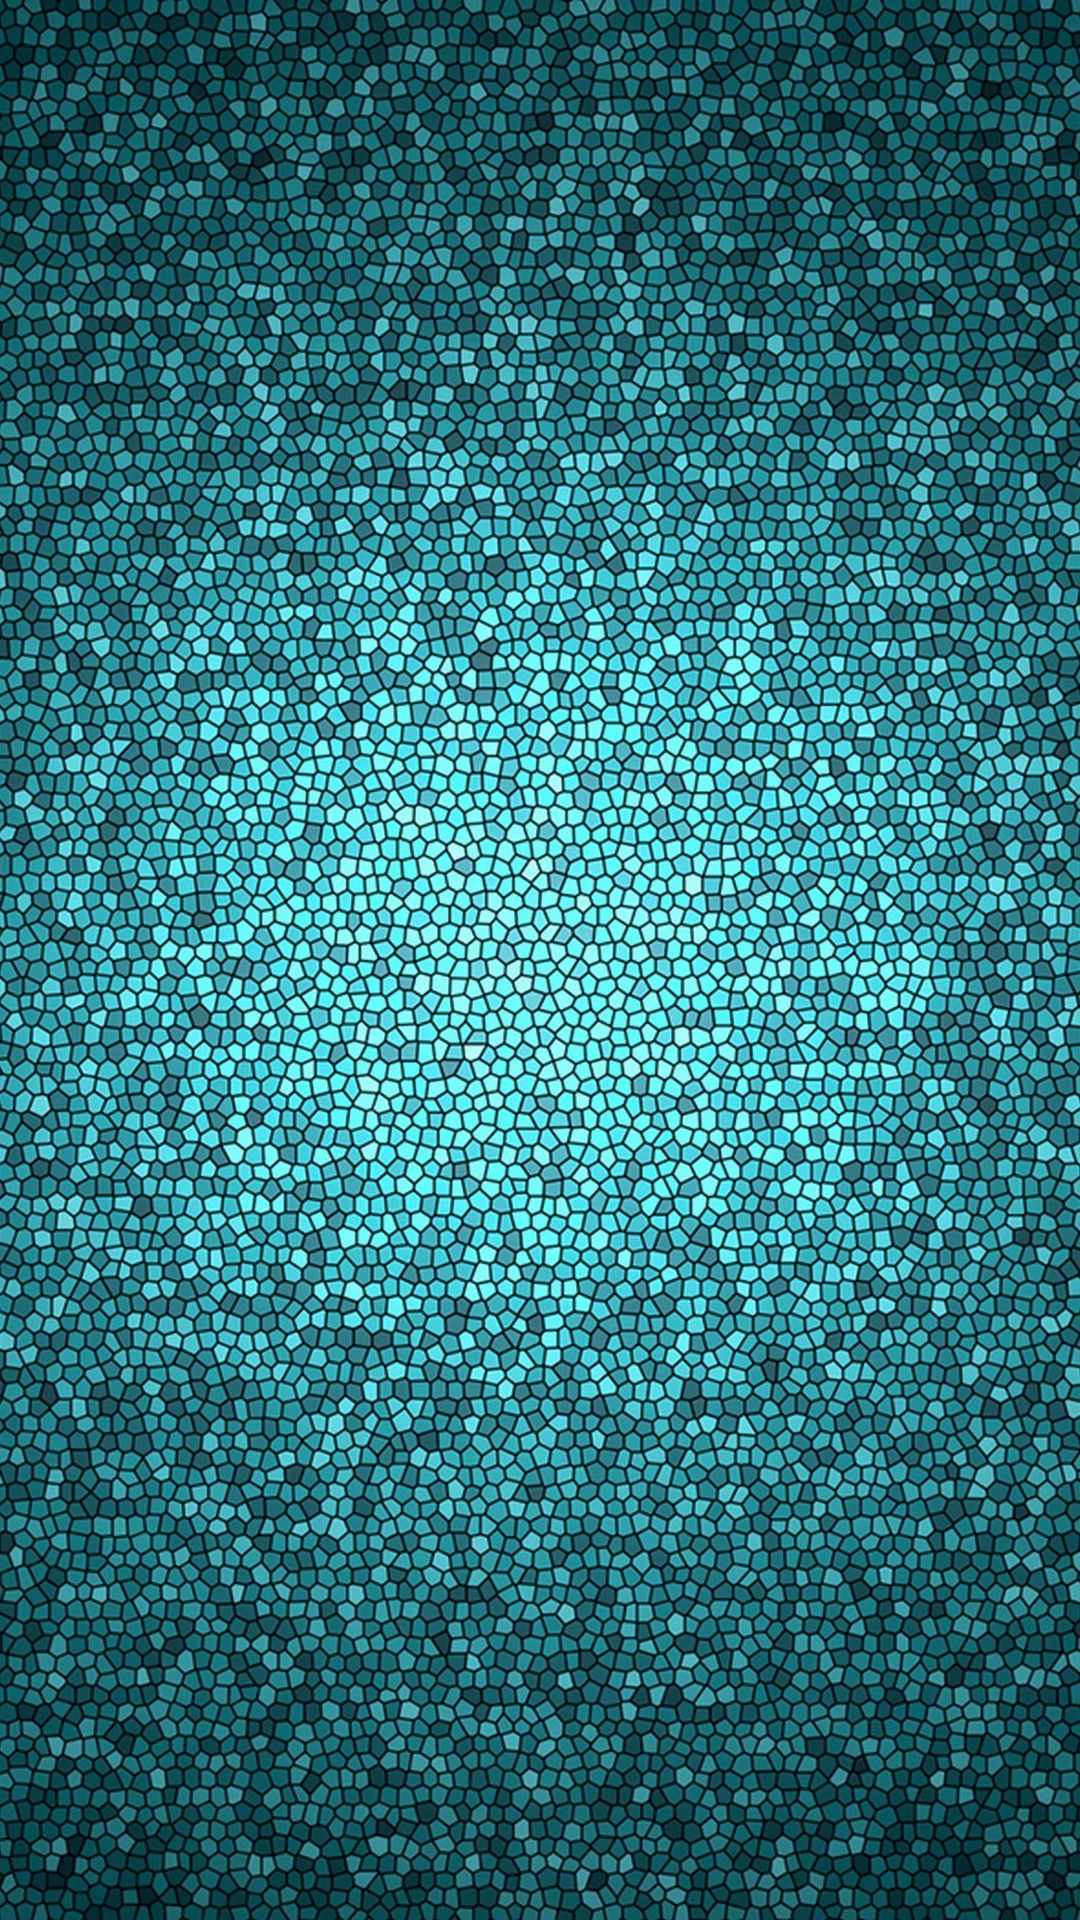 Teal Phone Background Wallpaper HD. Abstract wallpaper background, Mosaic wallpaper, Textured wallpaper